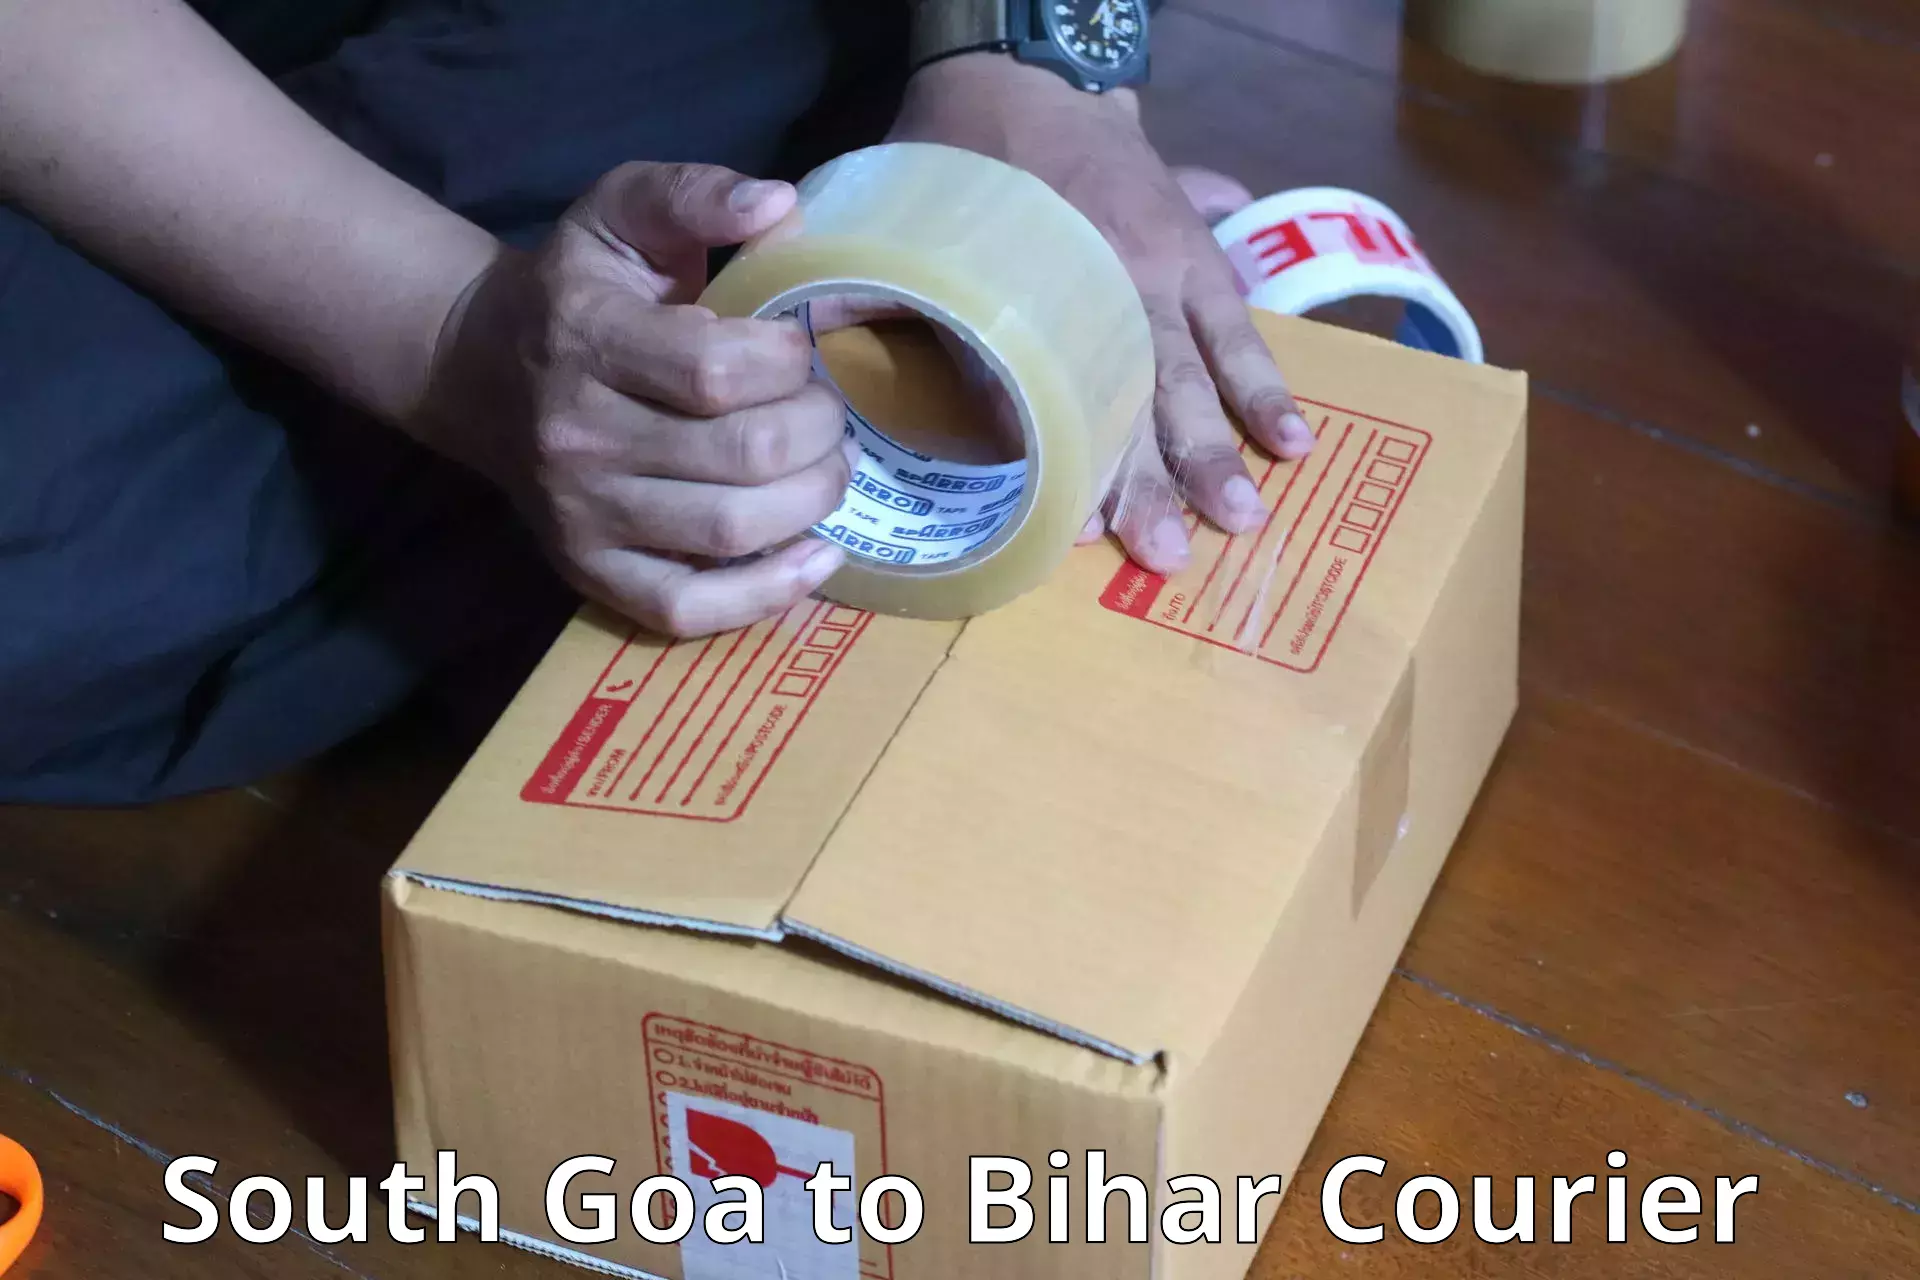 Luggage shipping planner South Goa to Bihar